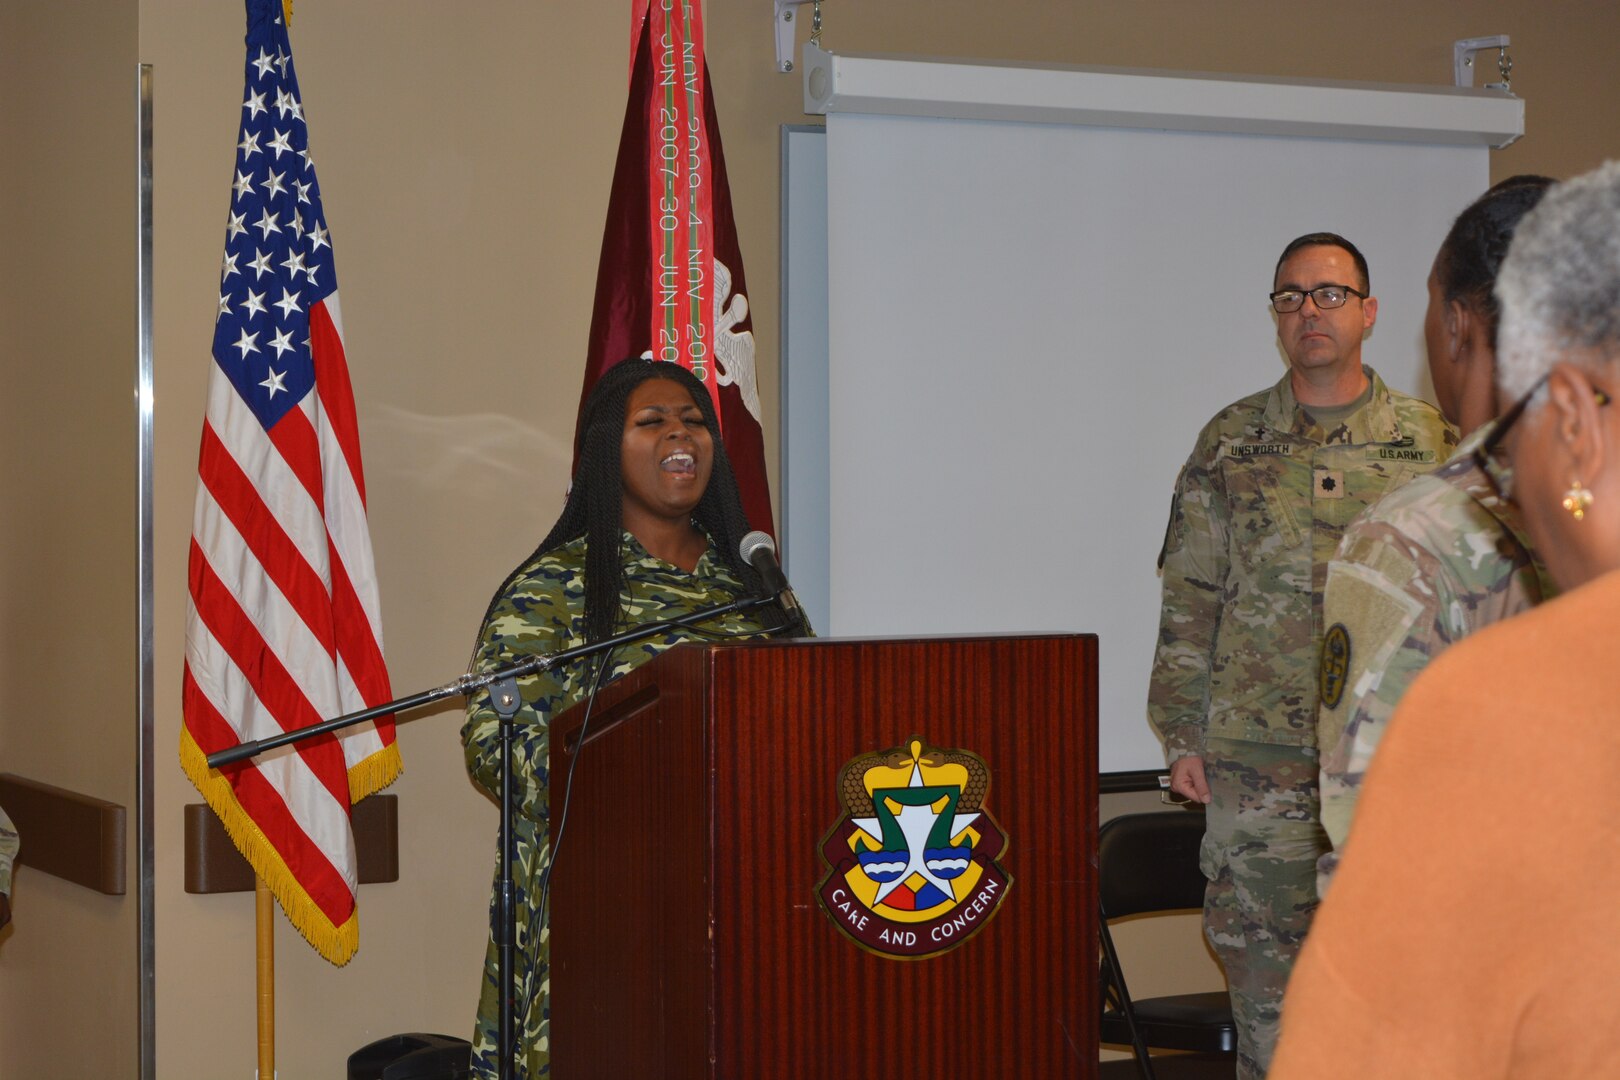 A highlight of the Carl R. Darnall Army Medical Center’s annual prayer breakfast, Nina Robinson, music coordinator for the Agape Church in Killeen, sang the national anthem and her version of “I’ll Trust You” by Richard Smallwood. (U.S. Army photo by Rodney Jackson, CRDAMC PAO)